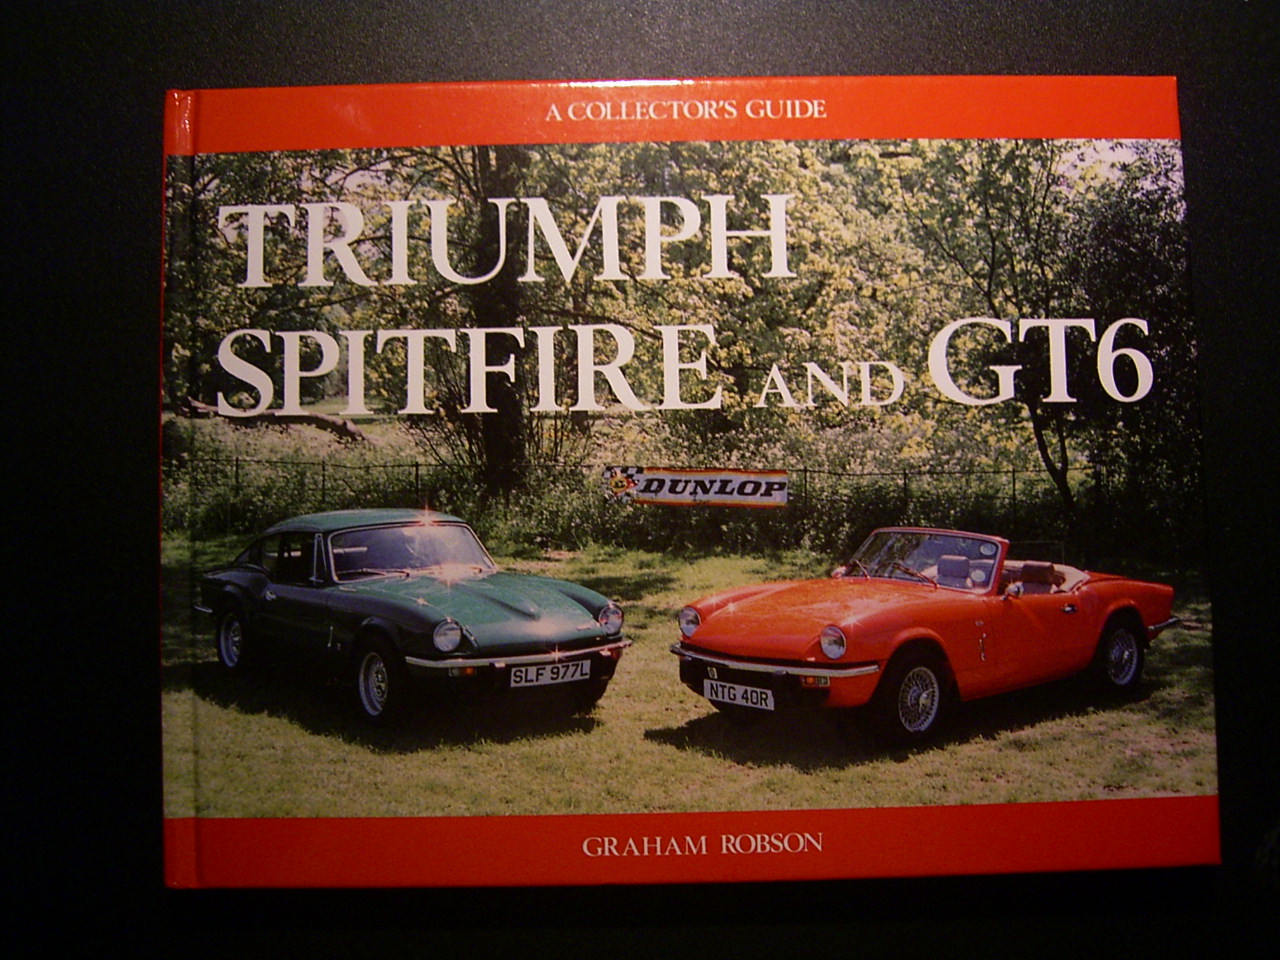 Triumph Spitfire and GT6 (Graham Robson)